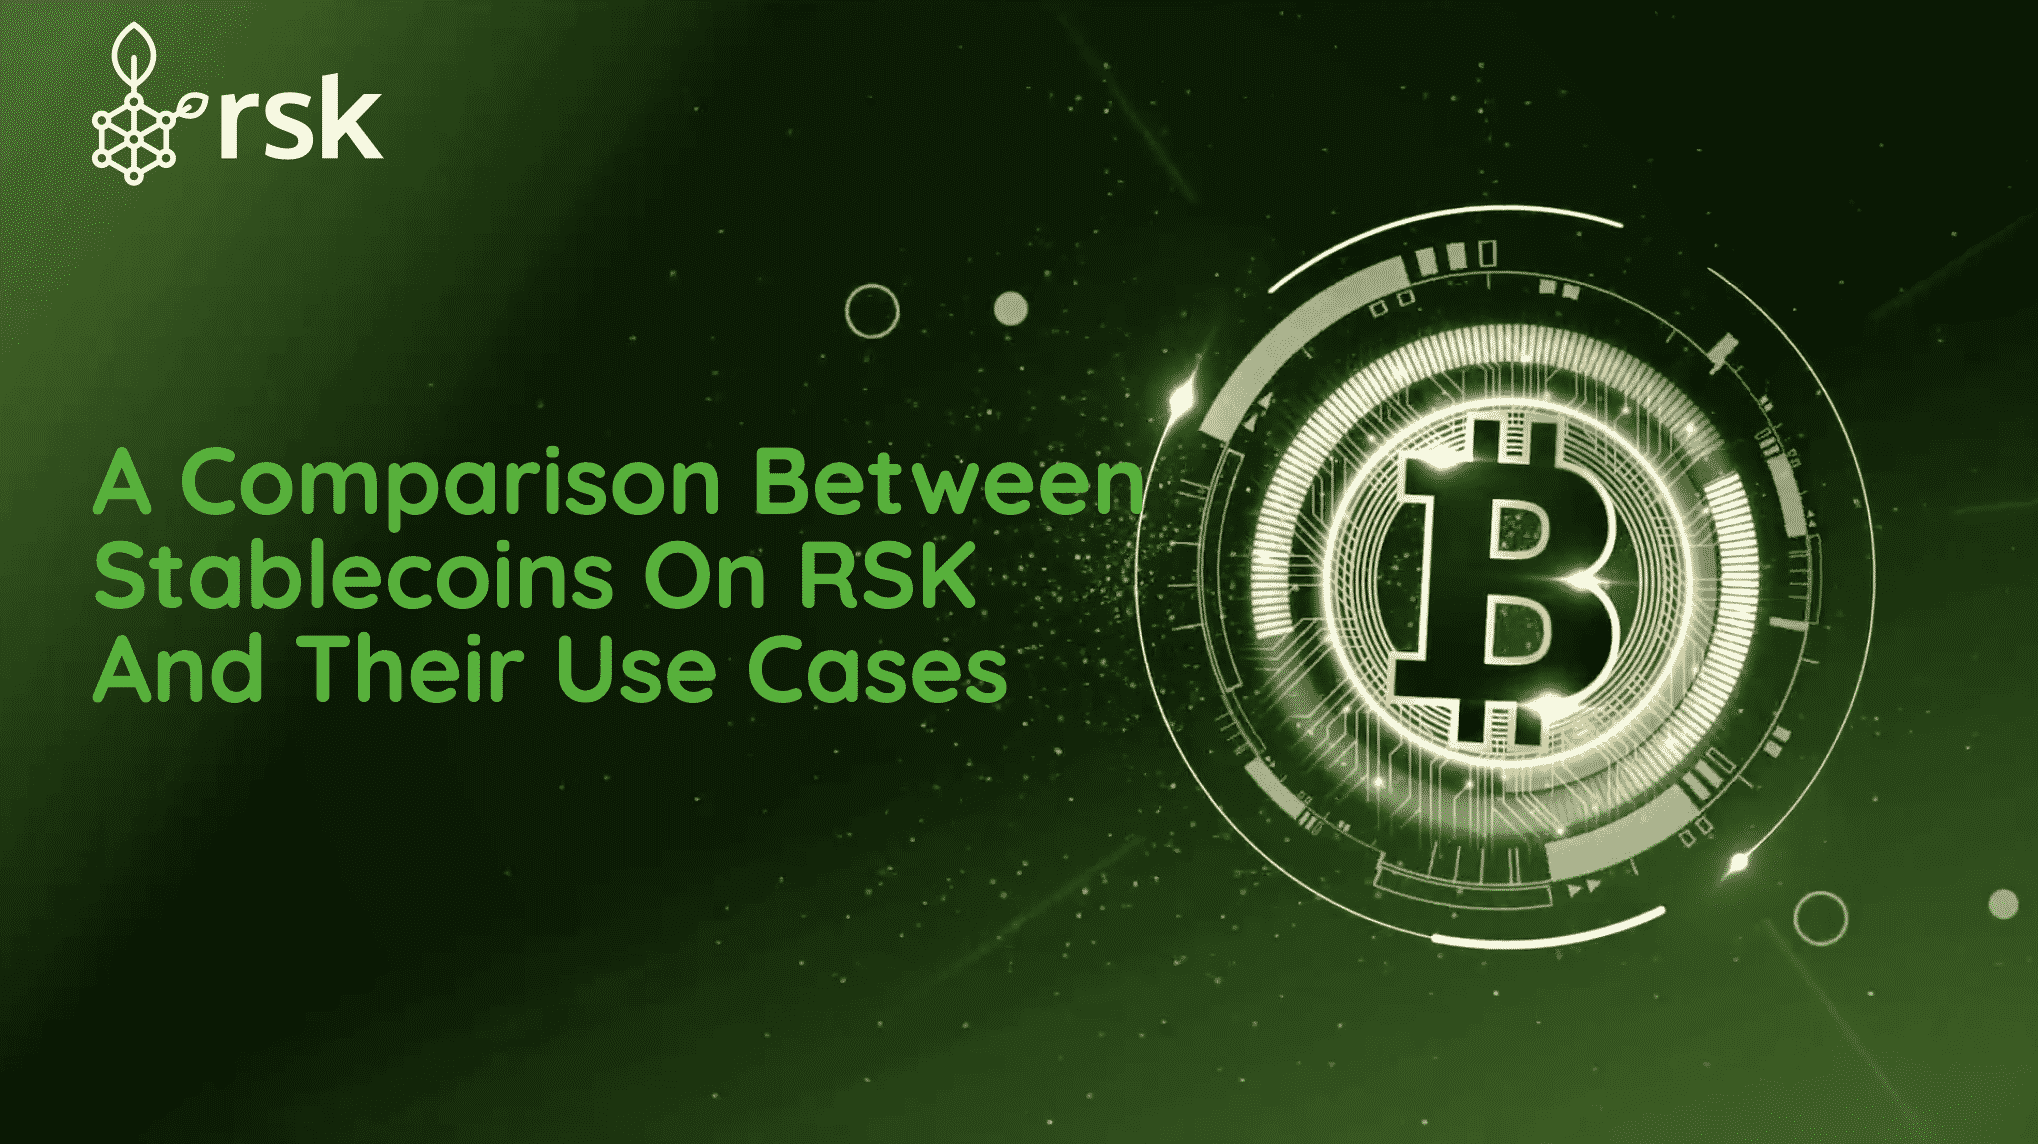 A Comparison Between Stablecoins On RSK And Their Use Cases